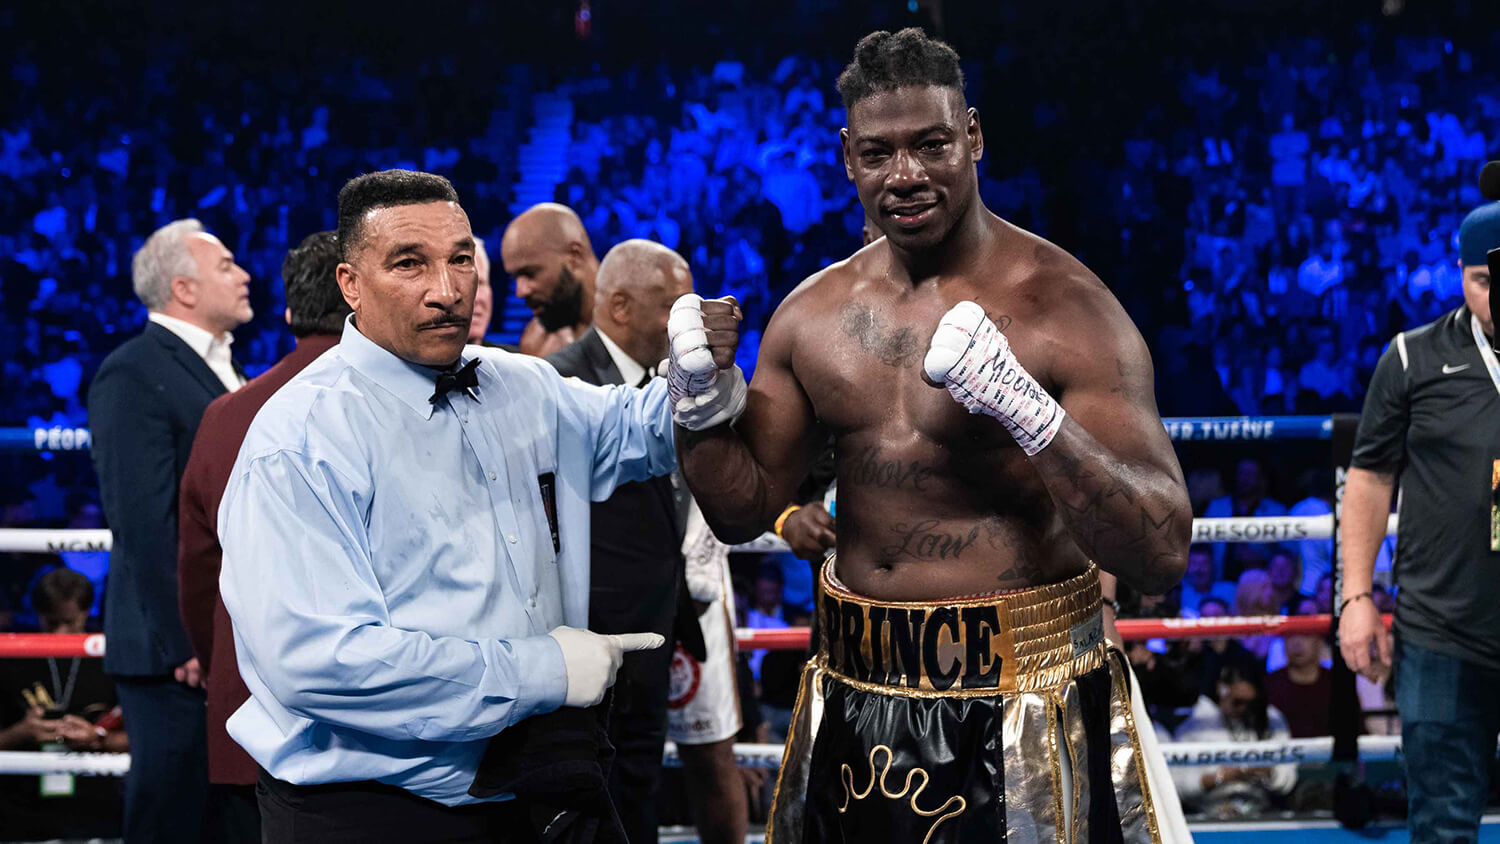 Charles Martin Wants Joshua Rematch, Says “…he never fought the real me”